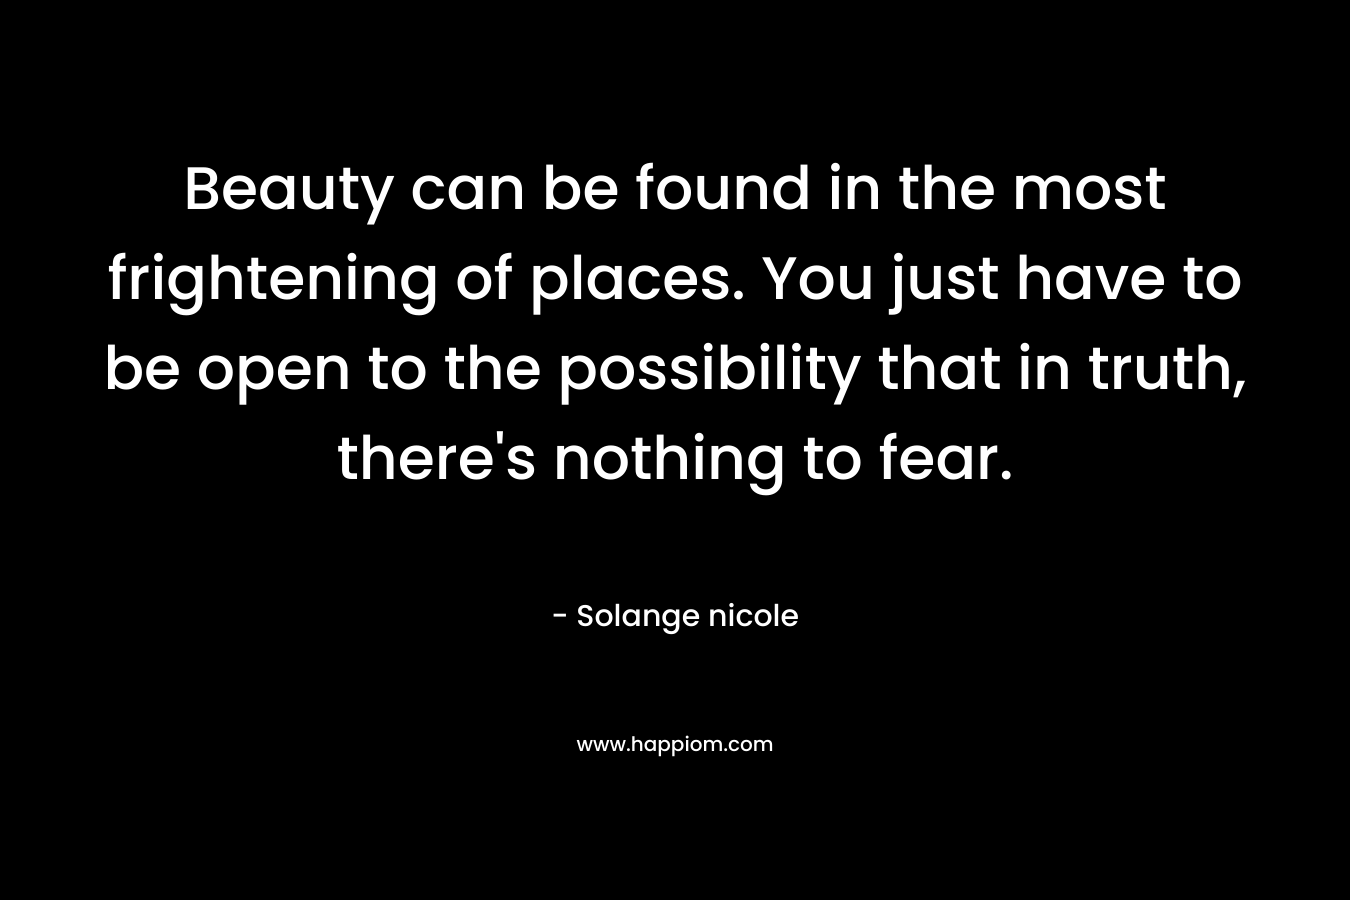 Beauty can be found in the most frightening of places. You just have to be open to the possibility that in truth, there’s nothing to fear. – Solange nicole